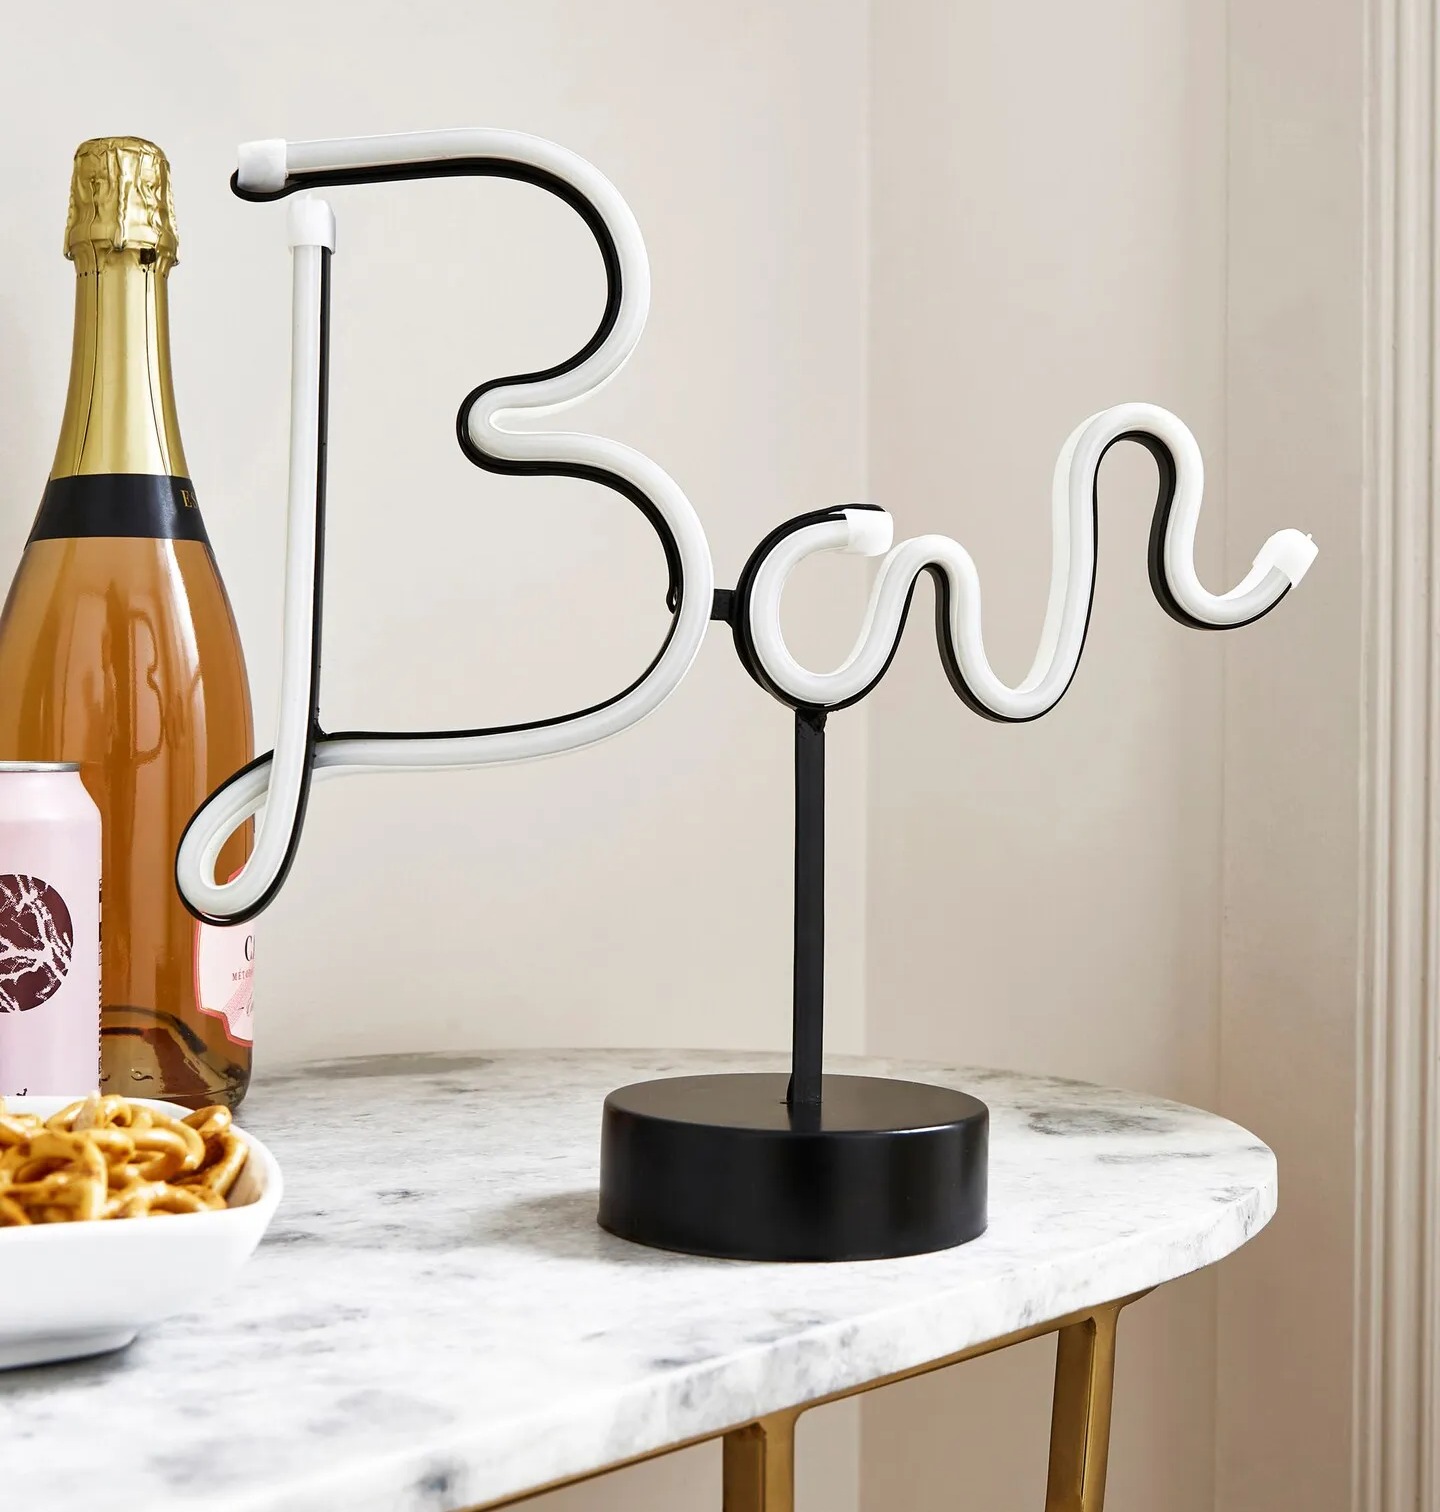 Save £9 on this neon 'bar' light from jdwilliams.co.uk